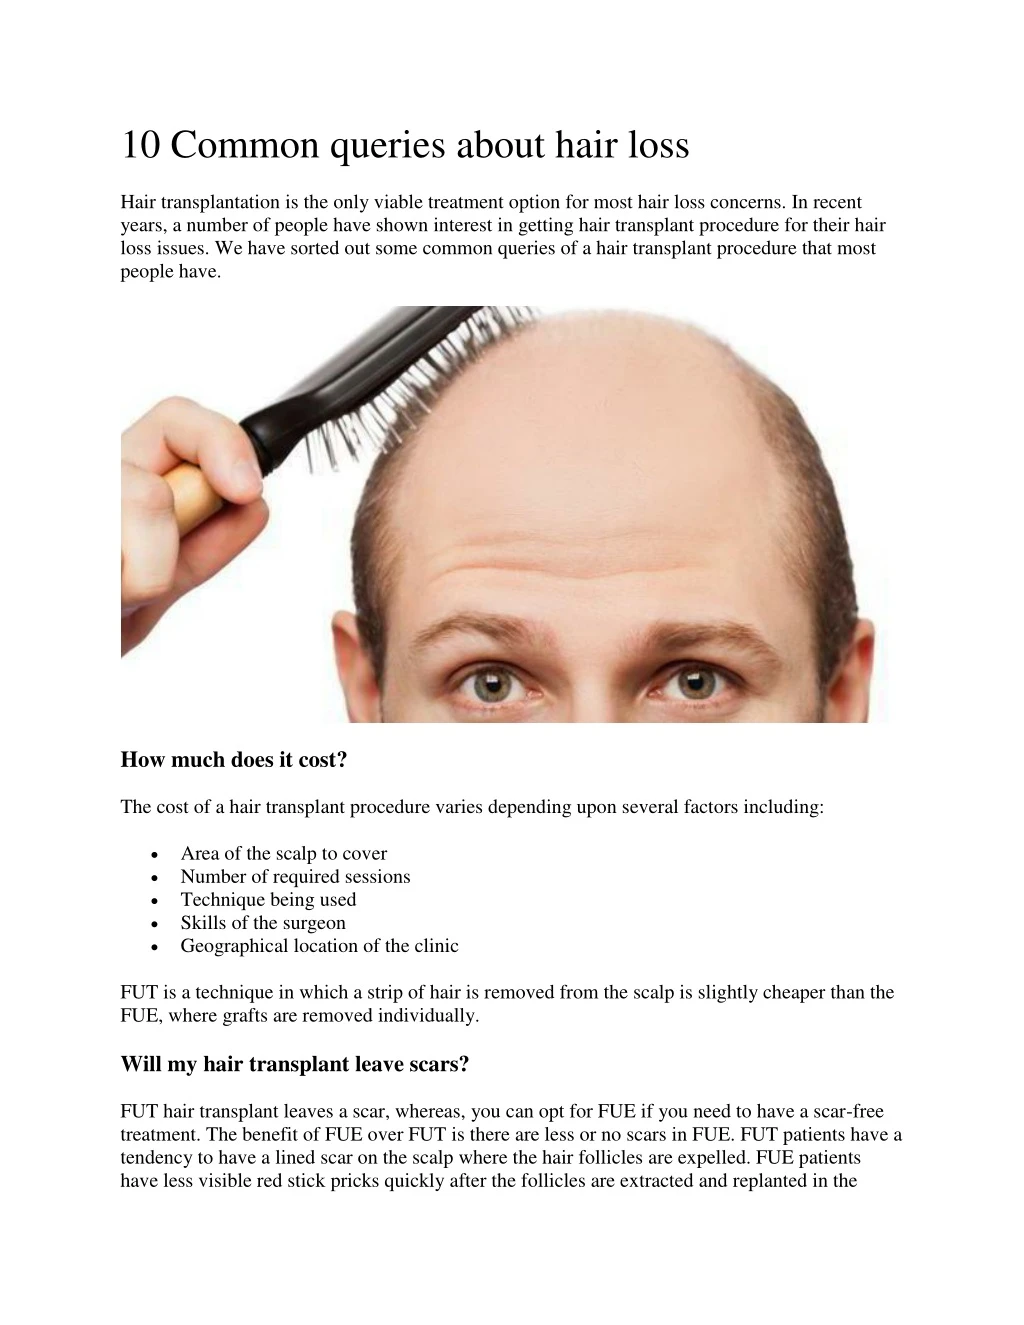 10 common queries about hair loss